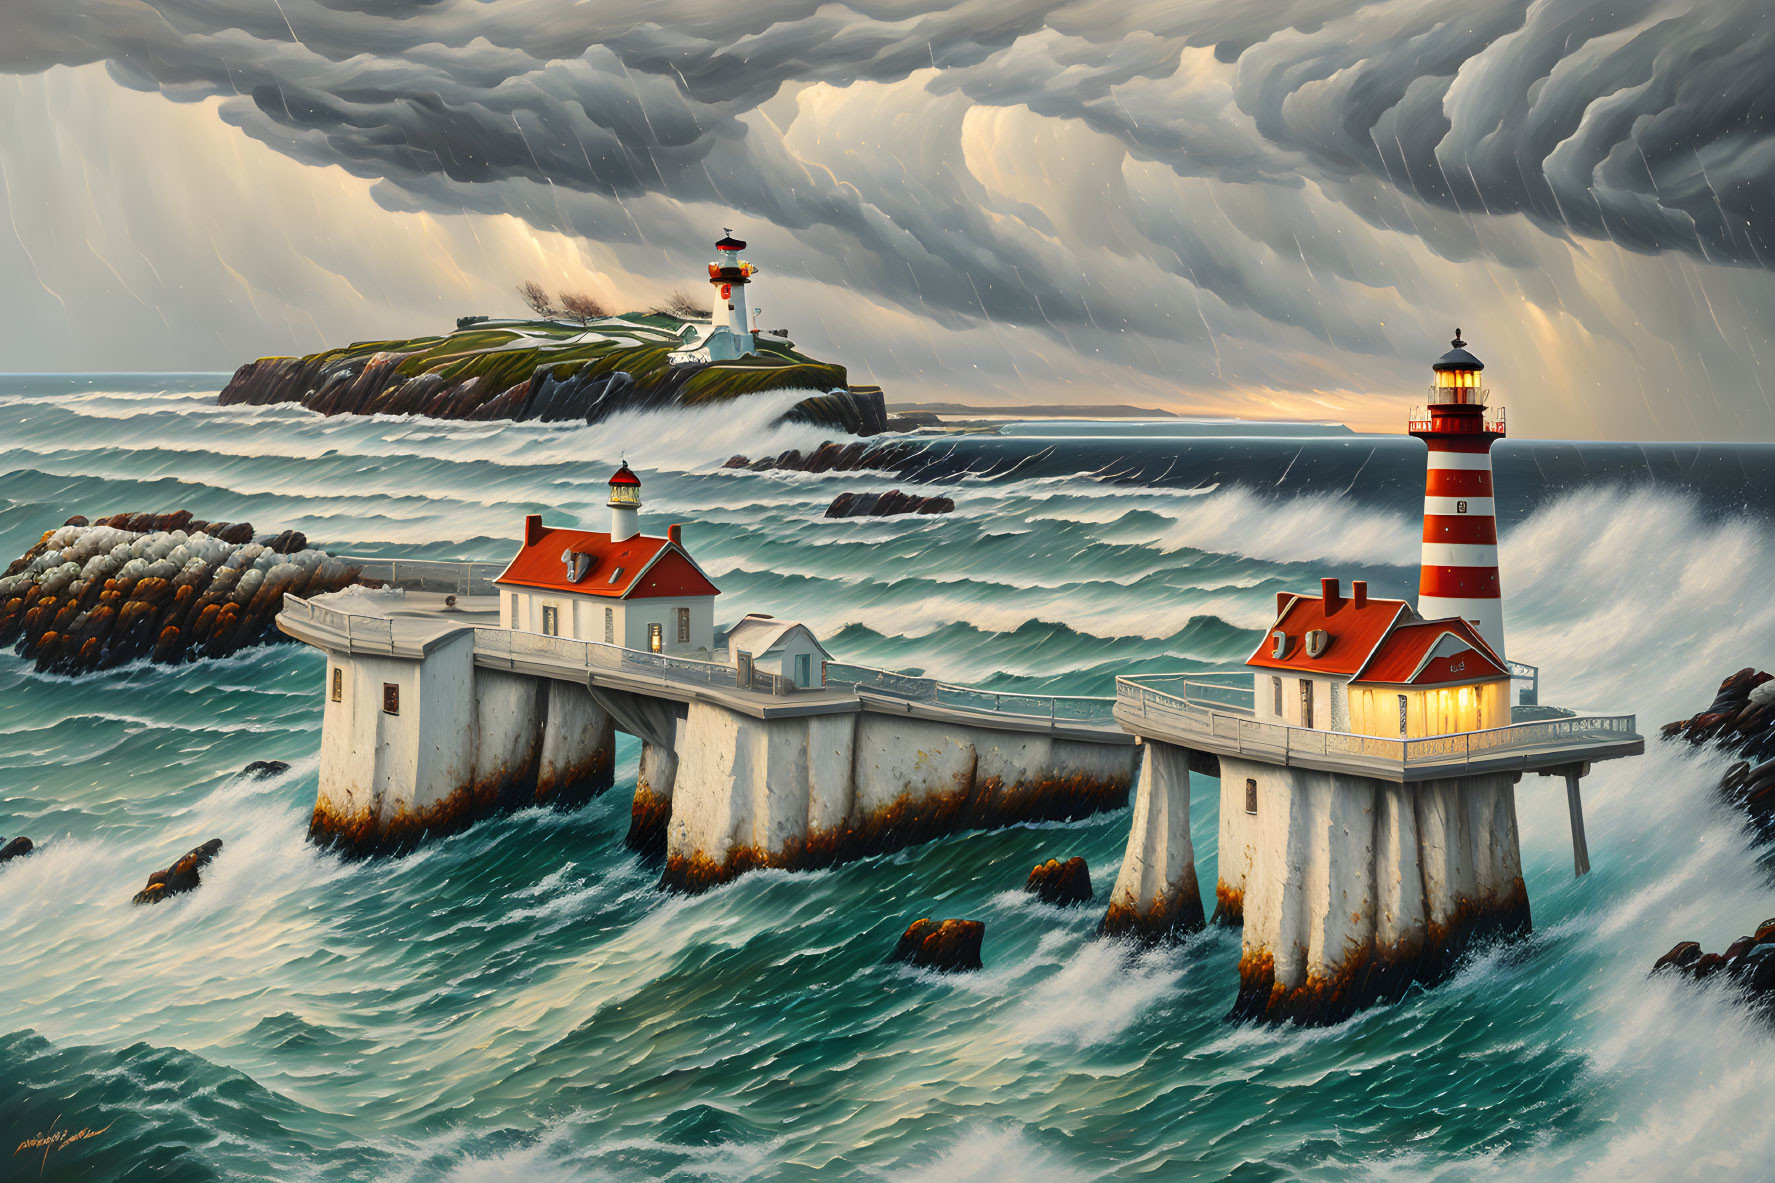 Lighthouse and buildings on rocky coast in stormy seas